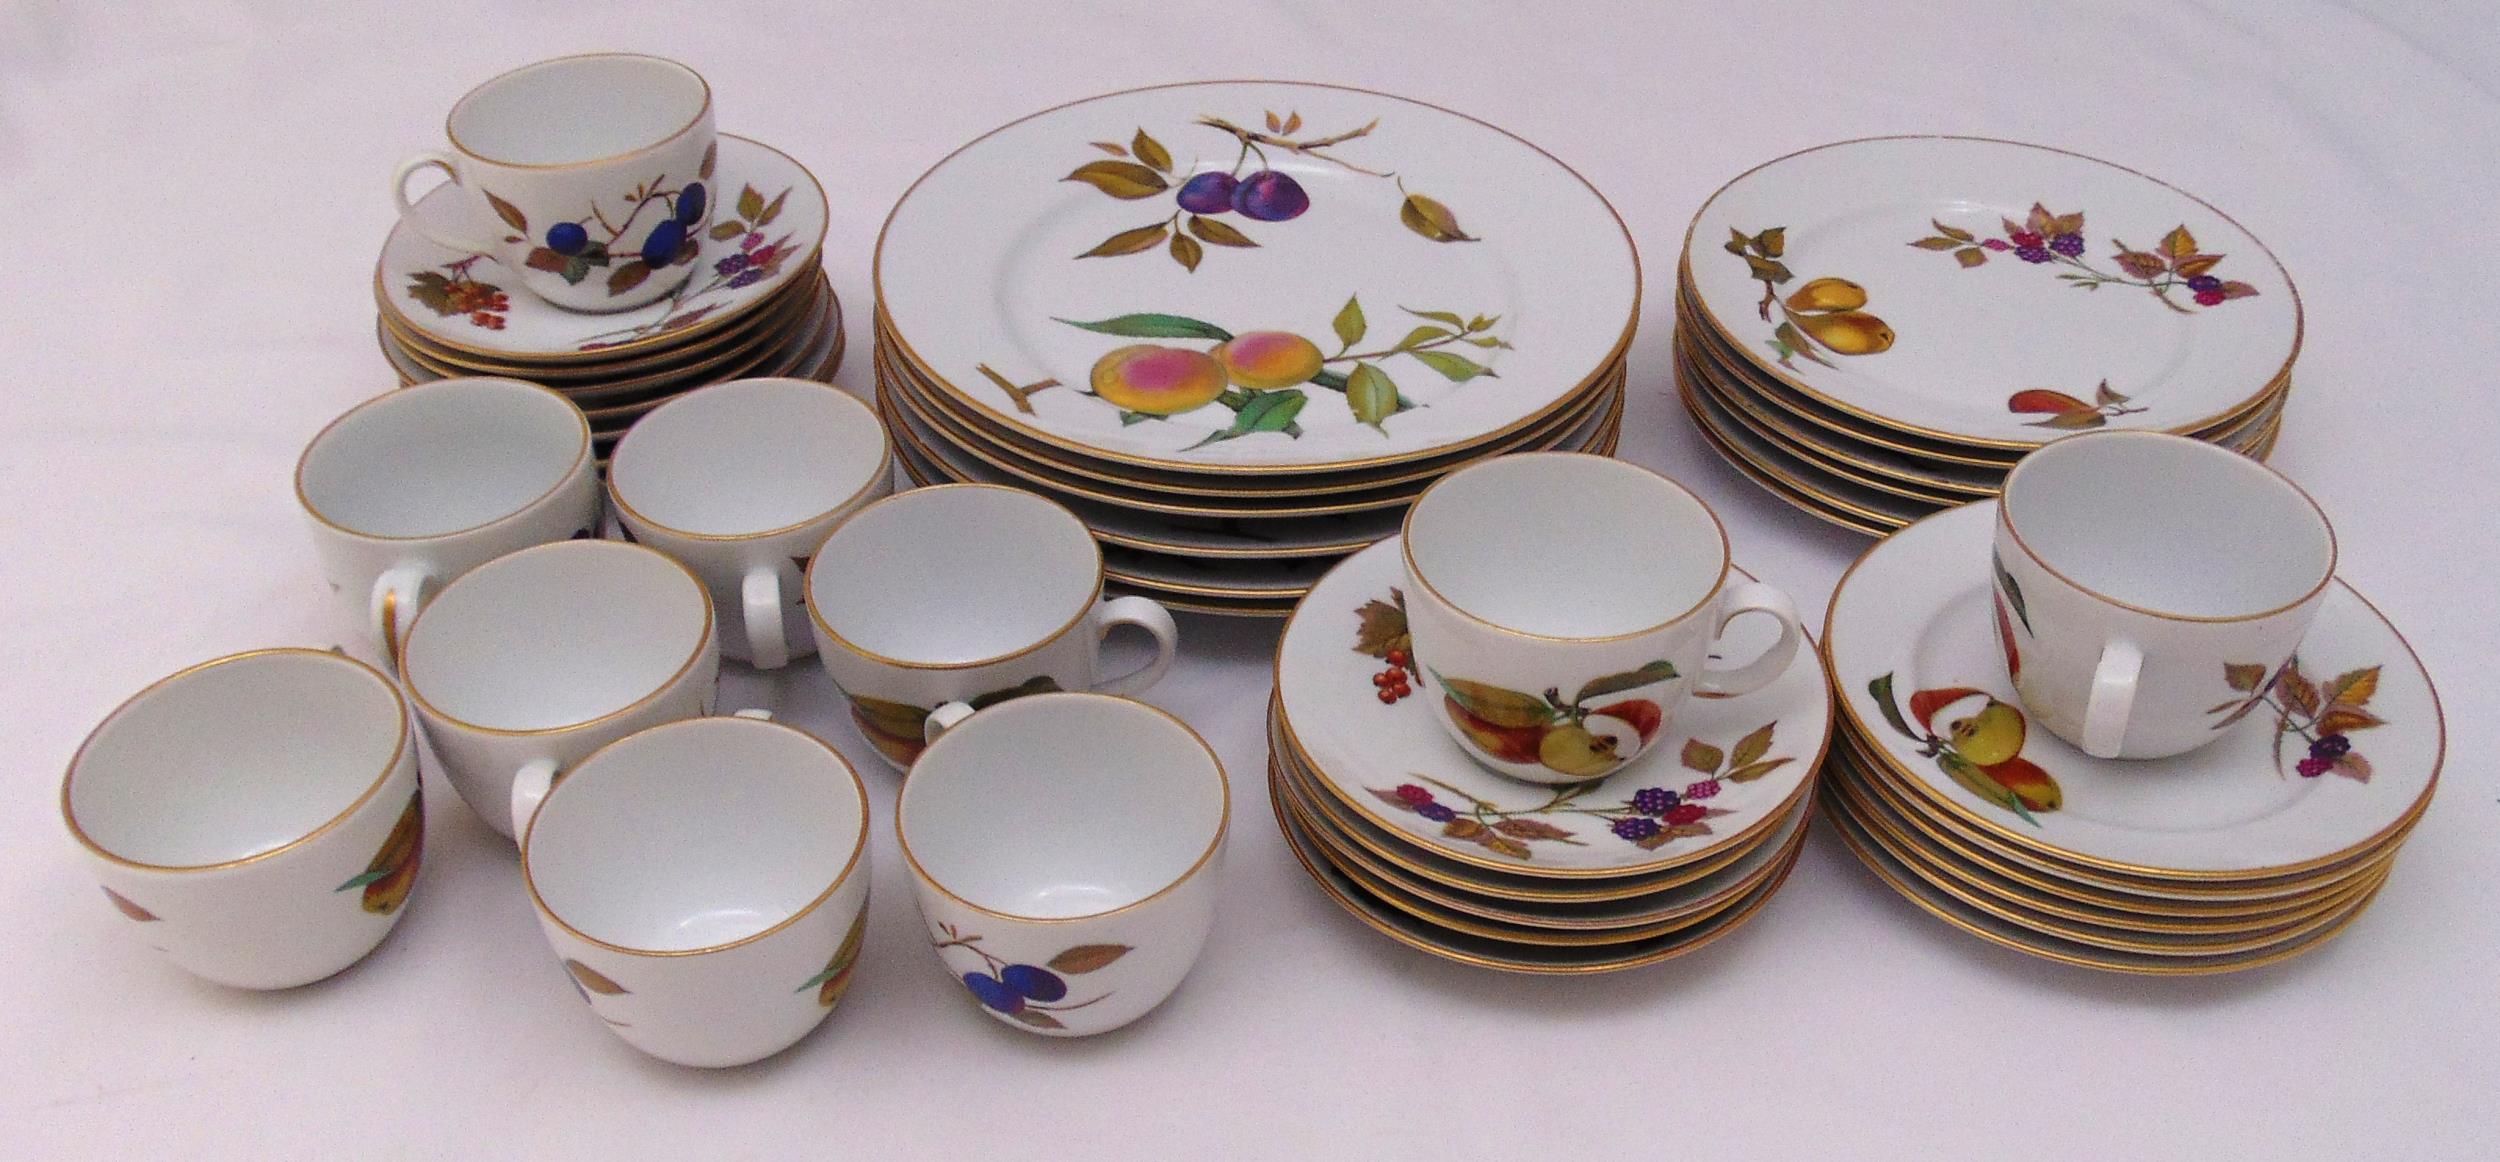 Wedgwood Evesham dinner and tea service to include plates, cups and saucers (40)